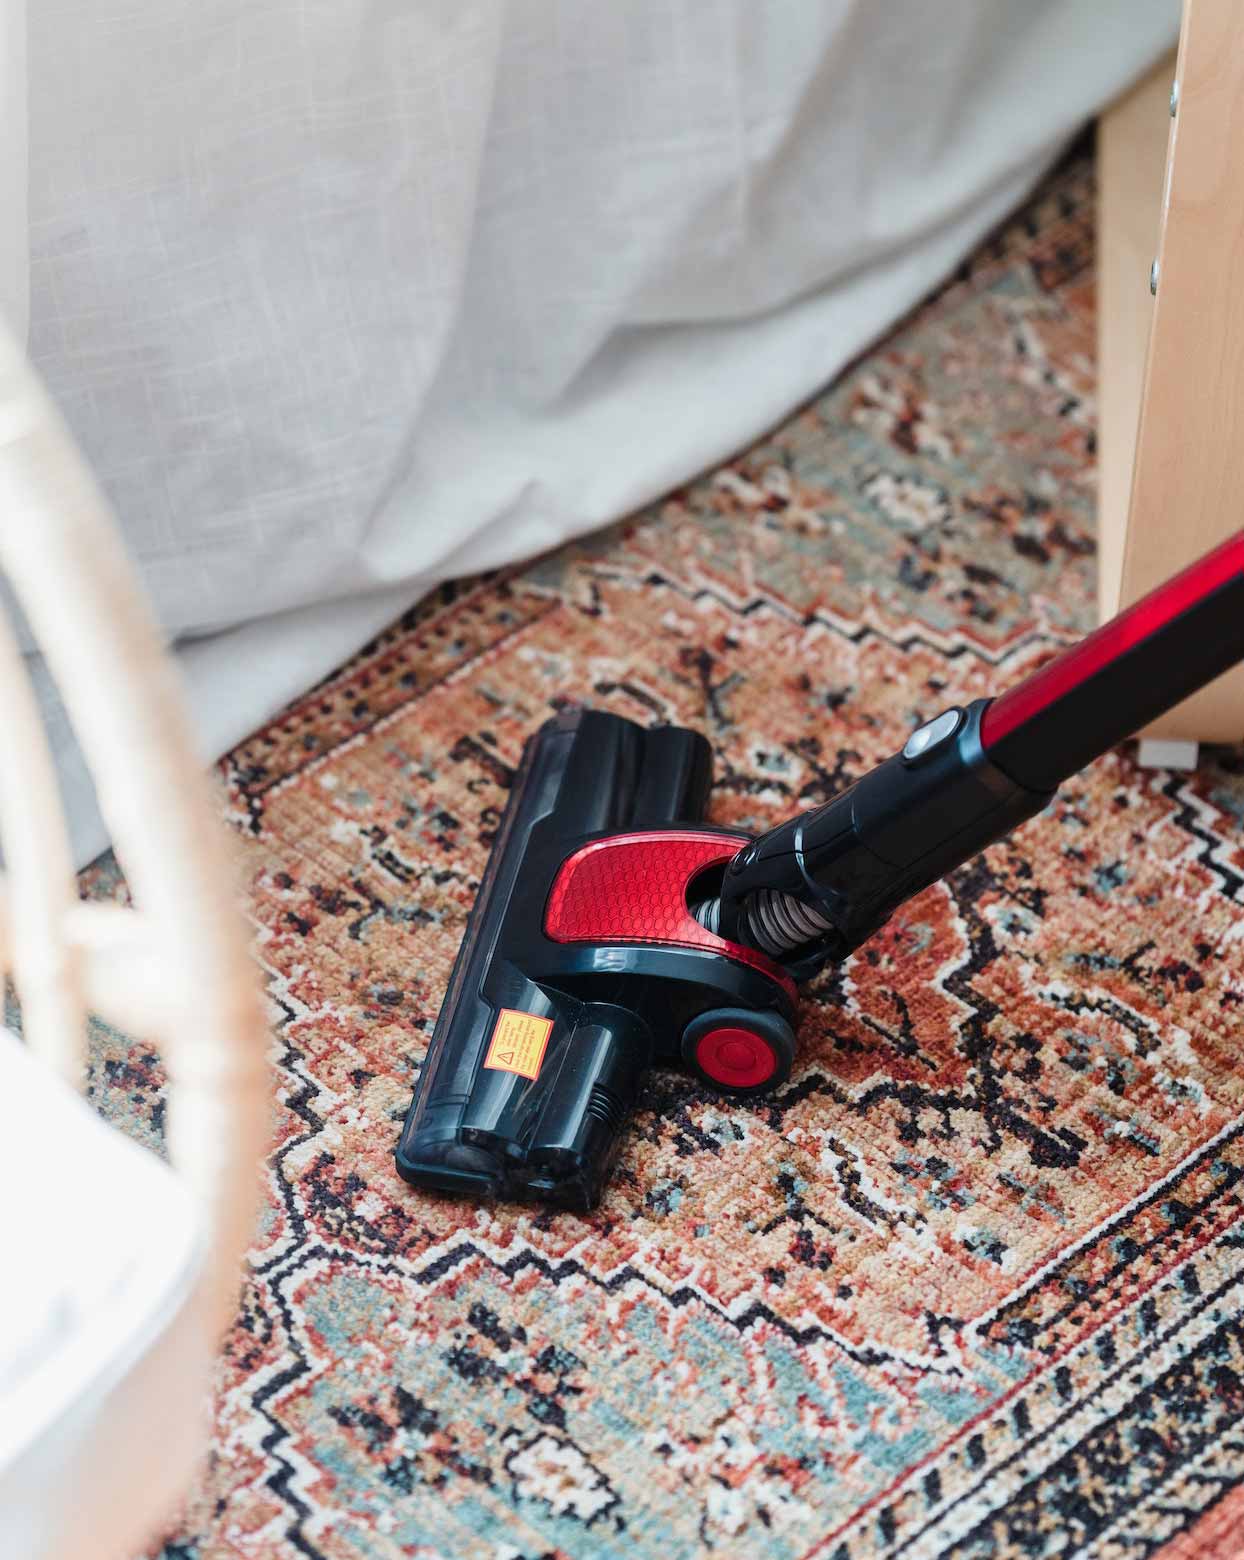 A vacuum cleaner on the carpet